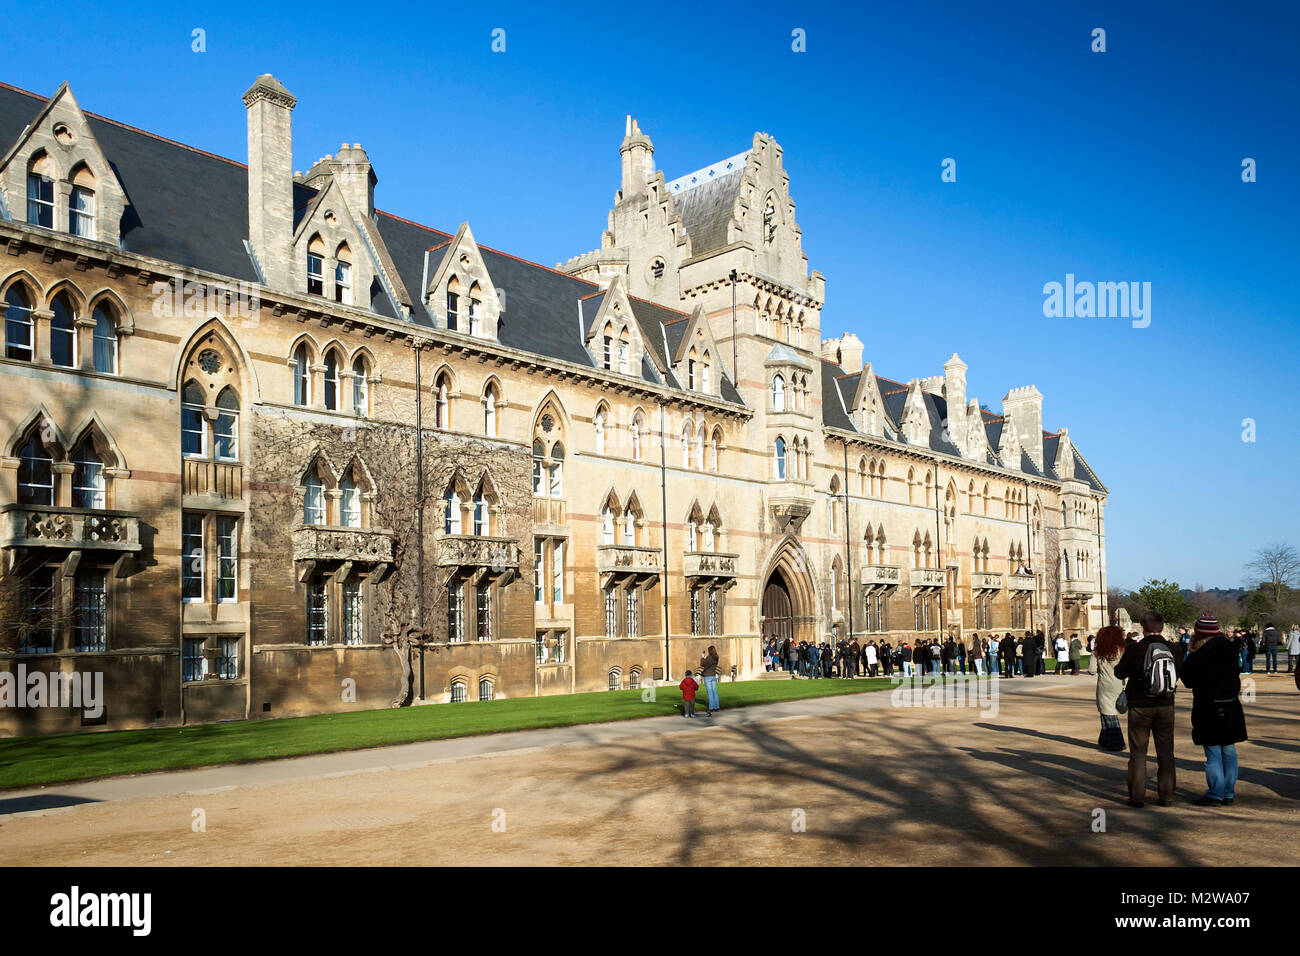 Oxford, Oxfordshire, UK - February 16, 2008: Christ church college university building in Oxford with queuing visitors on a clear sky winter day Stock Photo